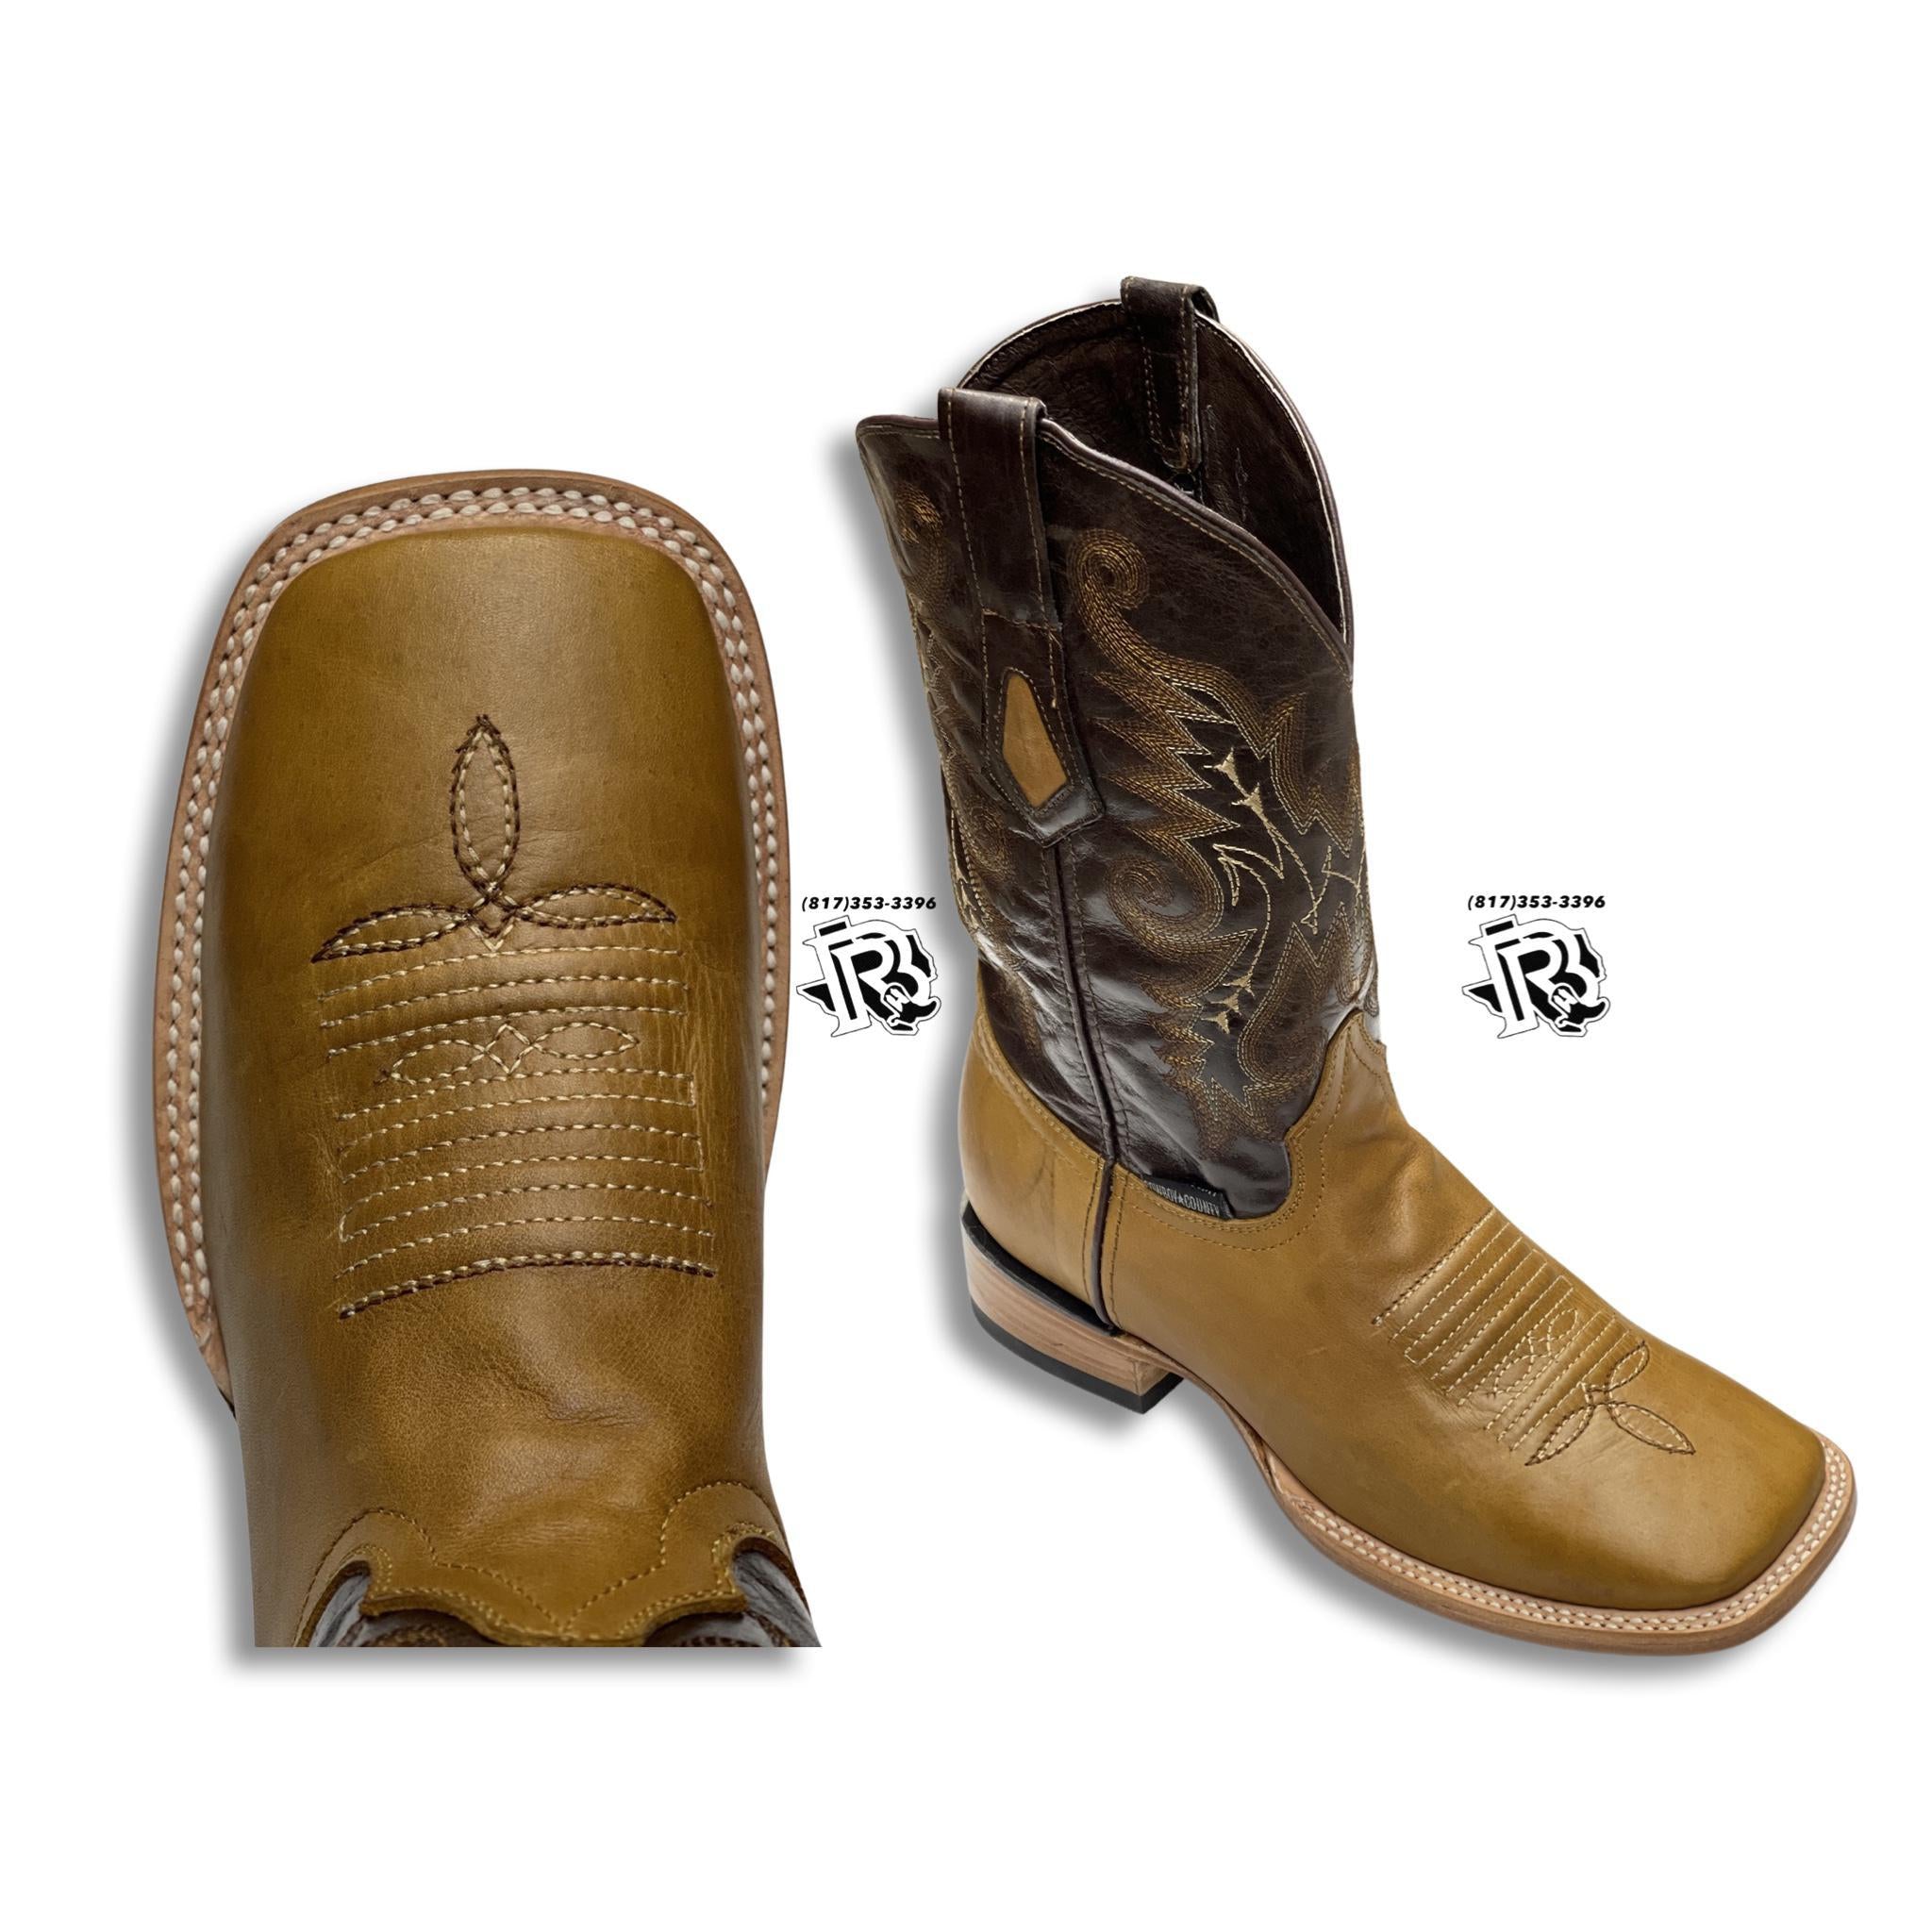 “ Hank “ | Men Western Boots Light Brown Square Toe Leather